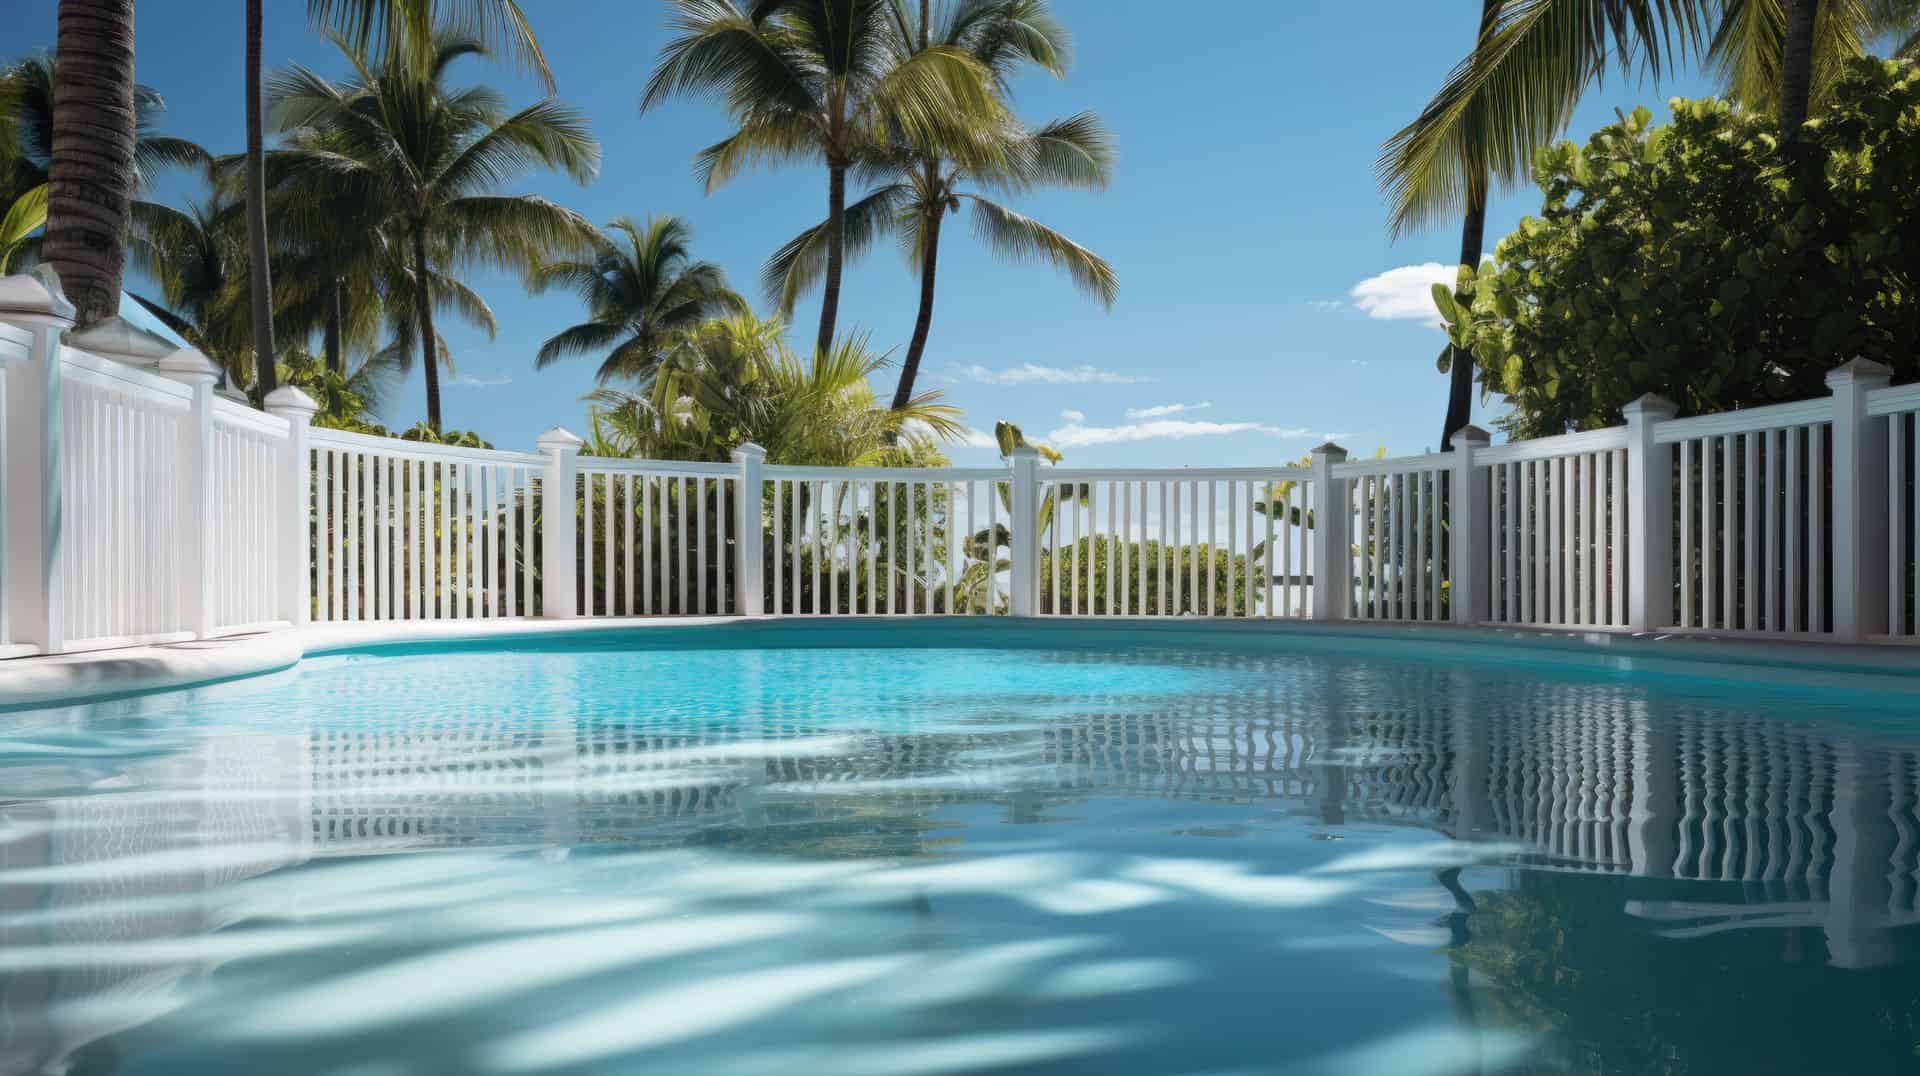 Vinyl pool fence behind small garden patch with palm trees, large bushes and uniquely shaped oval pool.